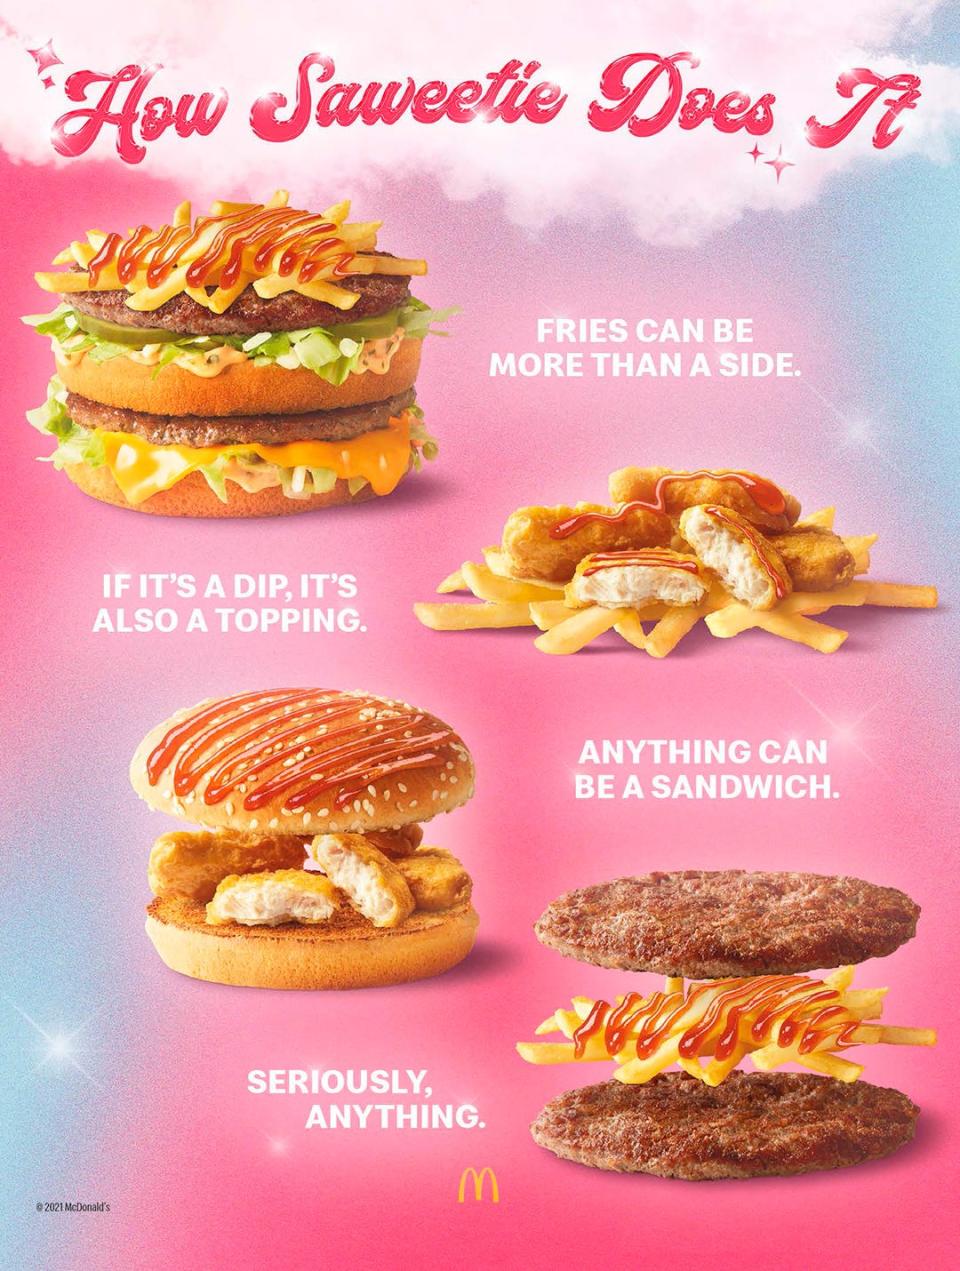 Saweetie has different ways she eats her McDonald's collaboration meal, which will debut Aug. 9 at restaurants nationwide.